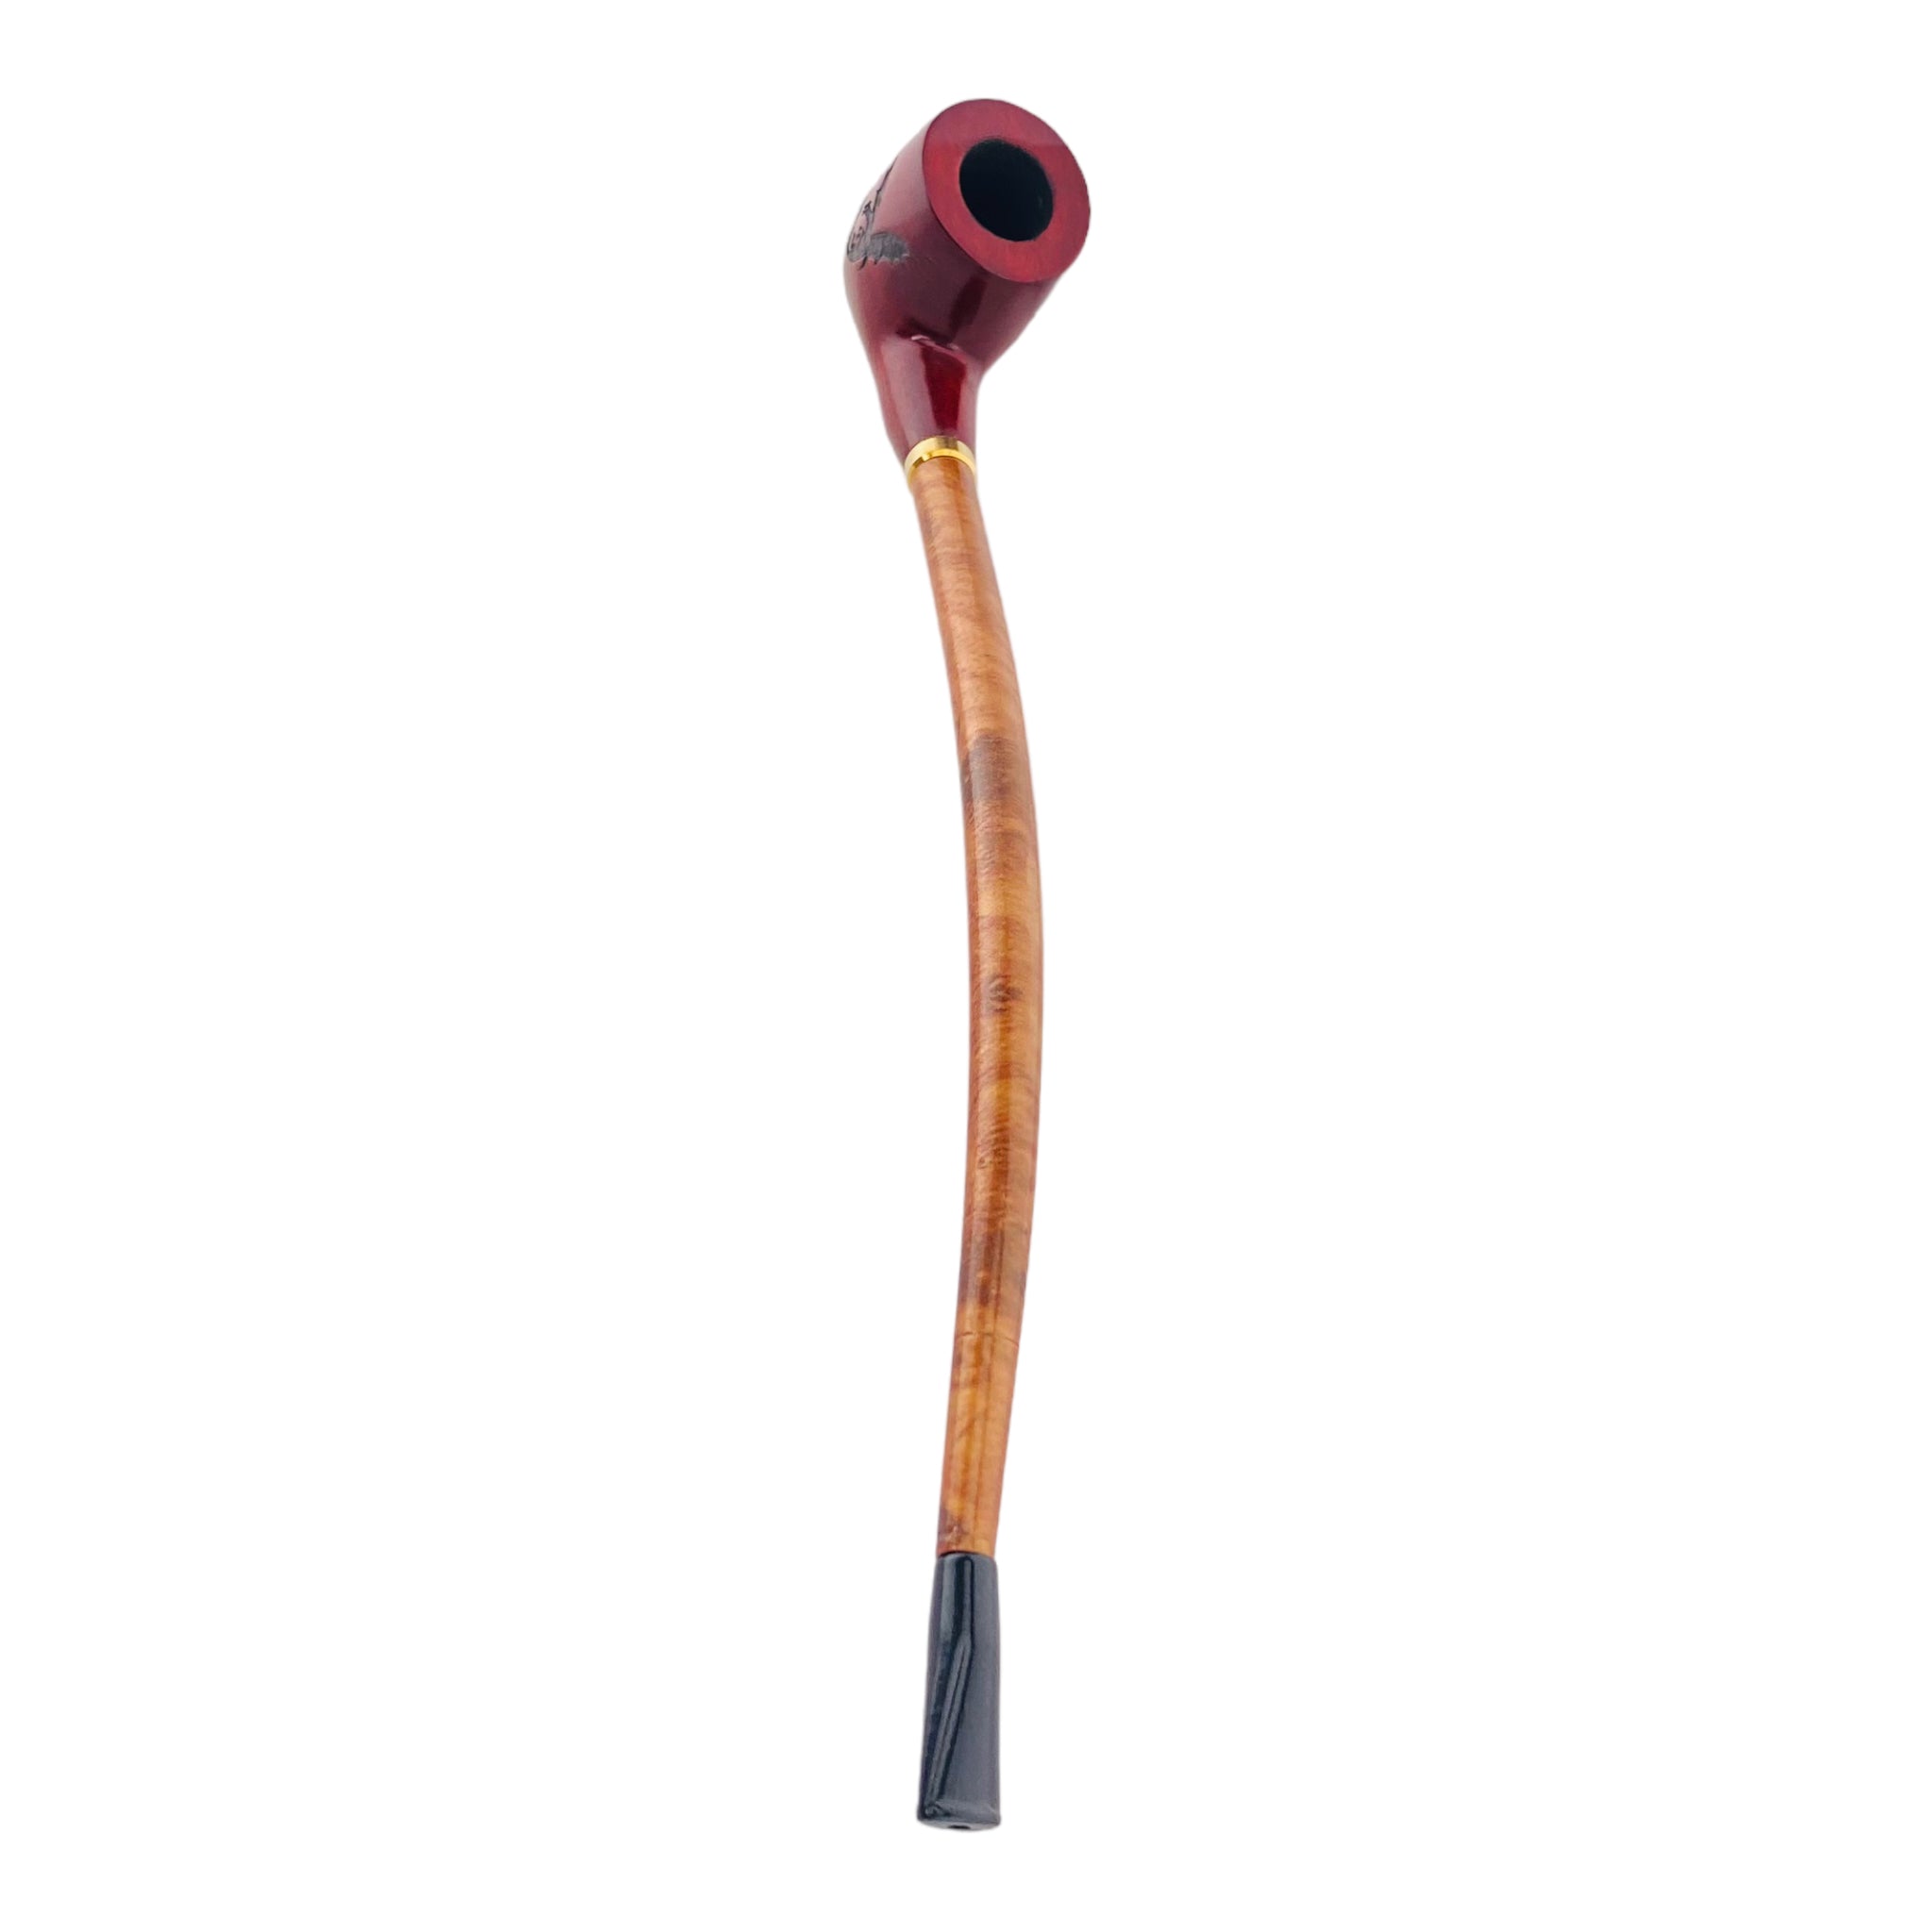 Shire Pipes - The Lord Of The Rings - Smaug Smoking Pipe